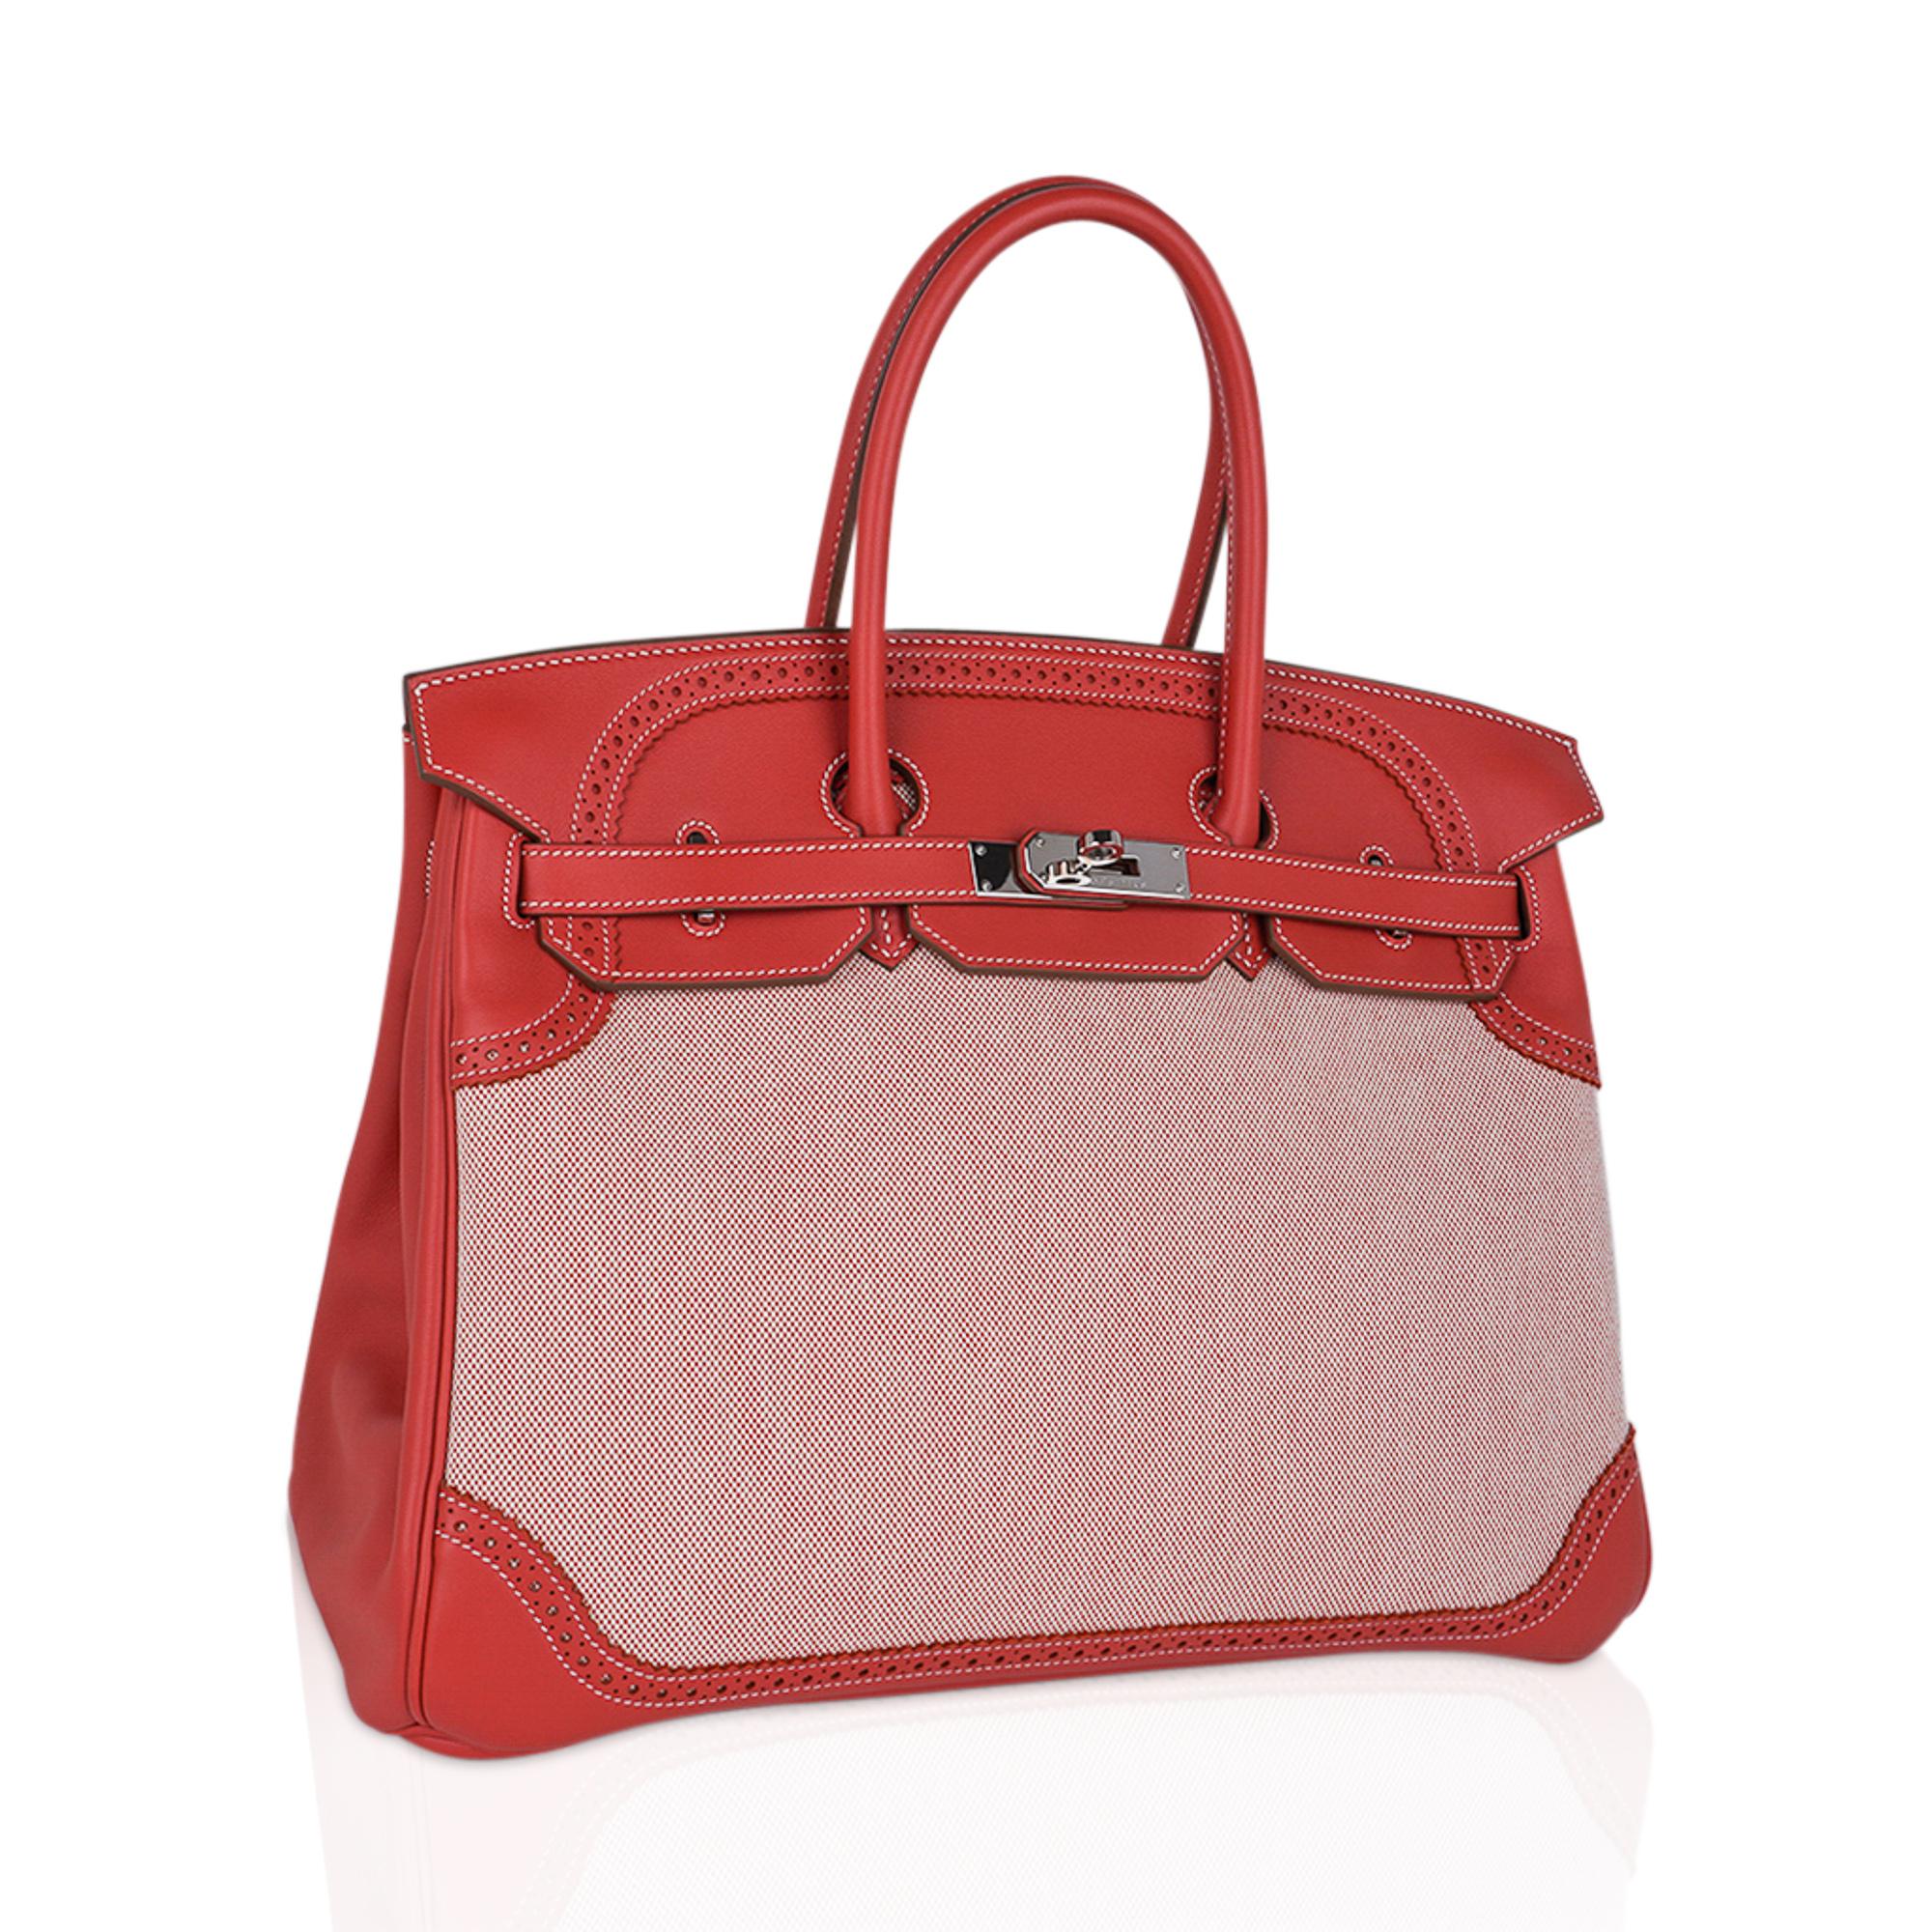 Mightychic offers a limited edition Hermes Birkin 35 Ghillies bag featured in Sanguine.
Inspired by the men's Brogue shoe, the detailed trim translates to a feminine handbag with
gorgeous, subtle influences.
Brought to life by Pierre Hardy who drew